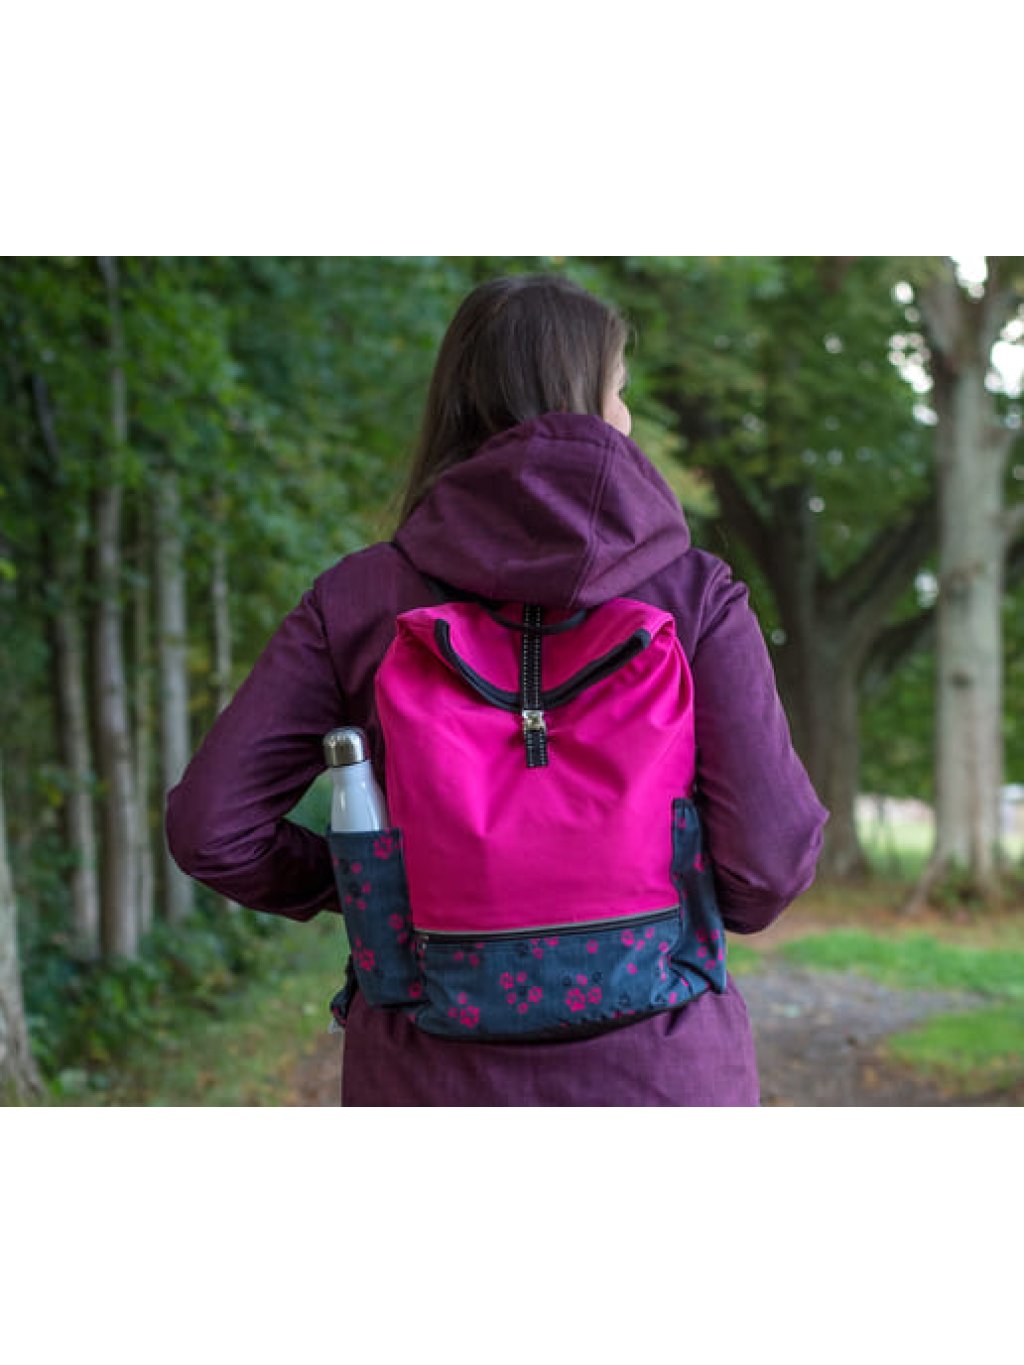 Training backpack PINK